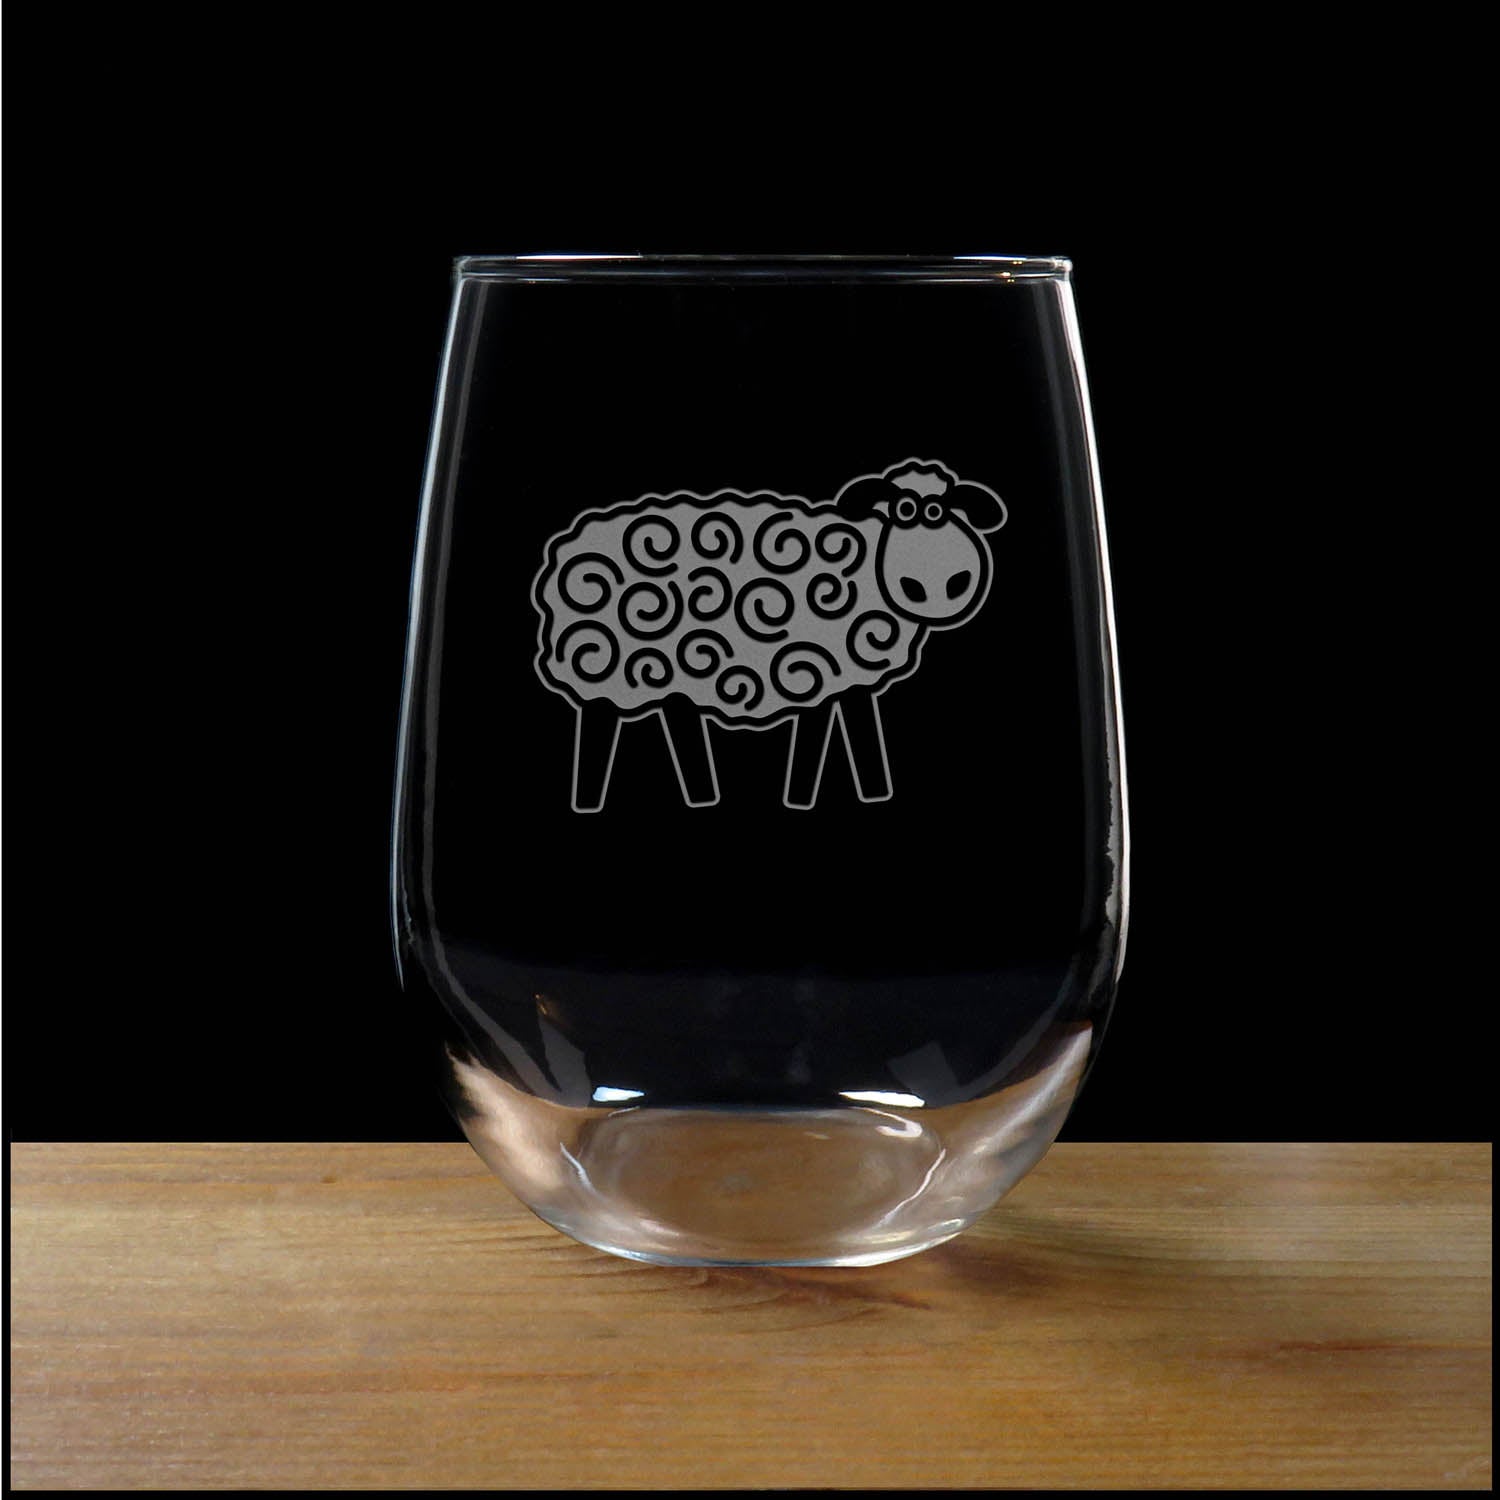 Cute Sheep image etched on a 17oz Stemless Wine Glass - Copyright Hues in Glass